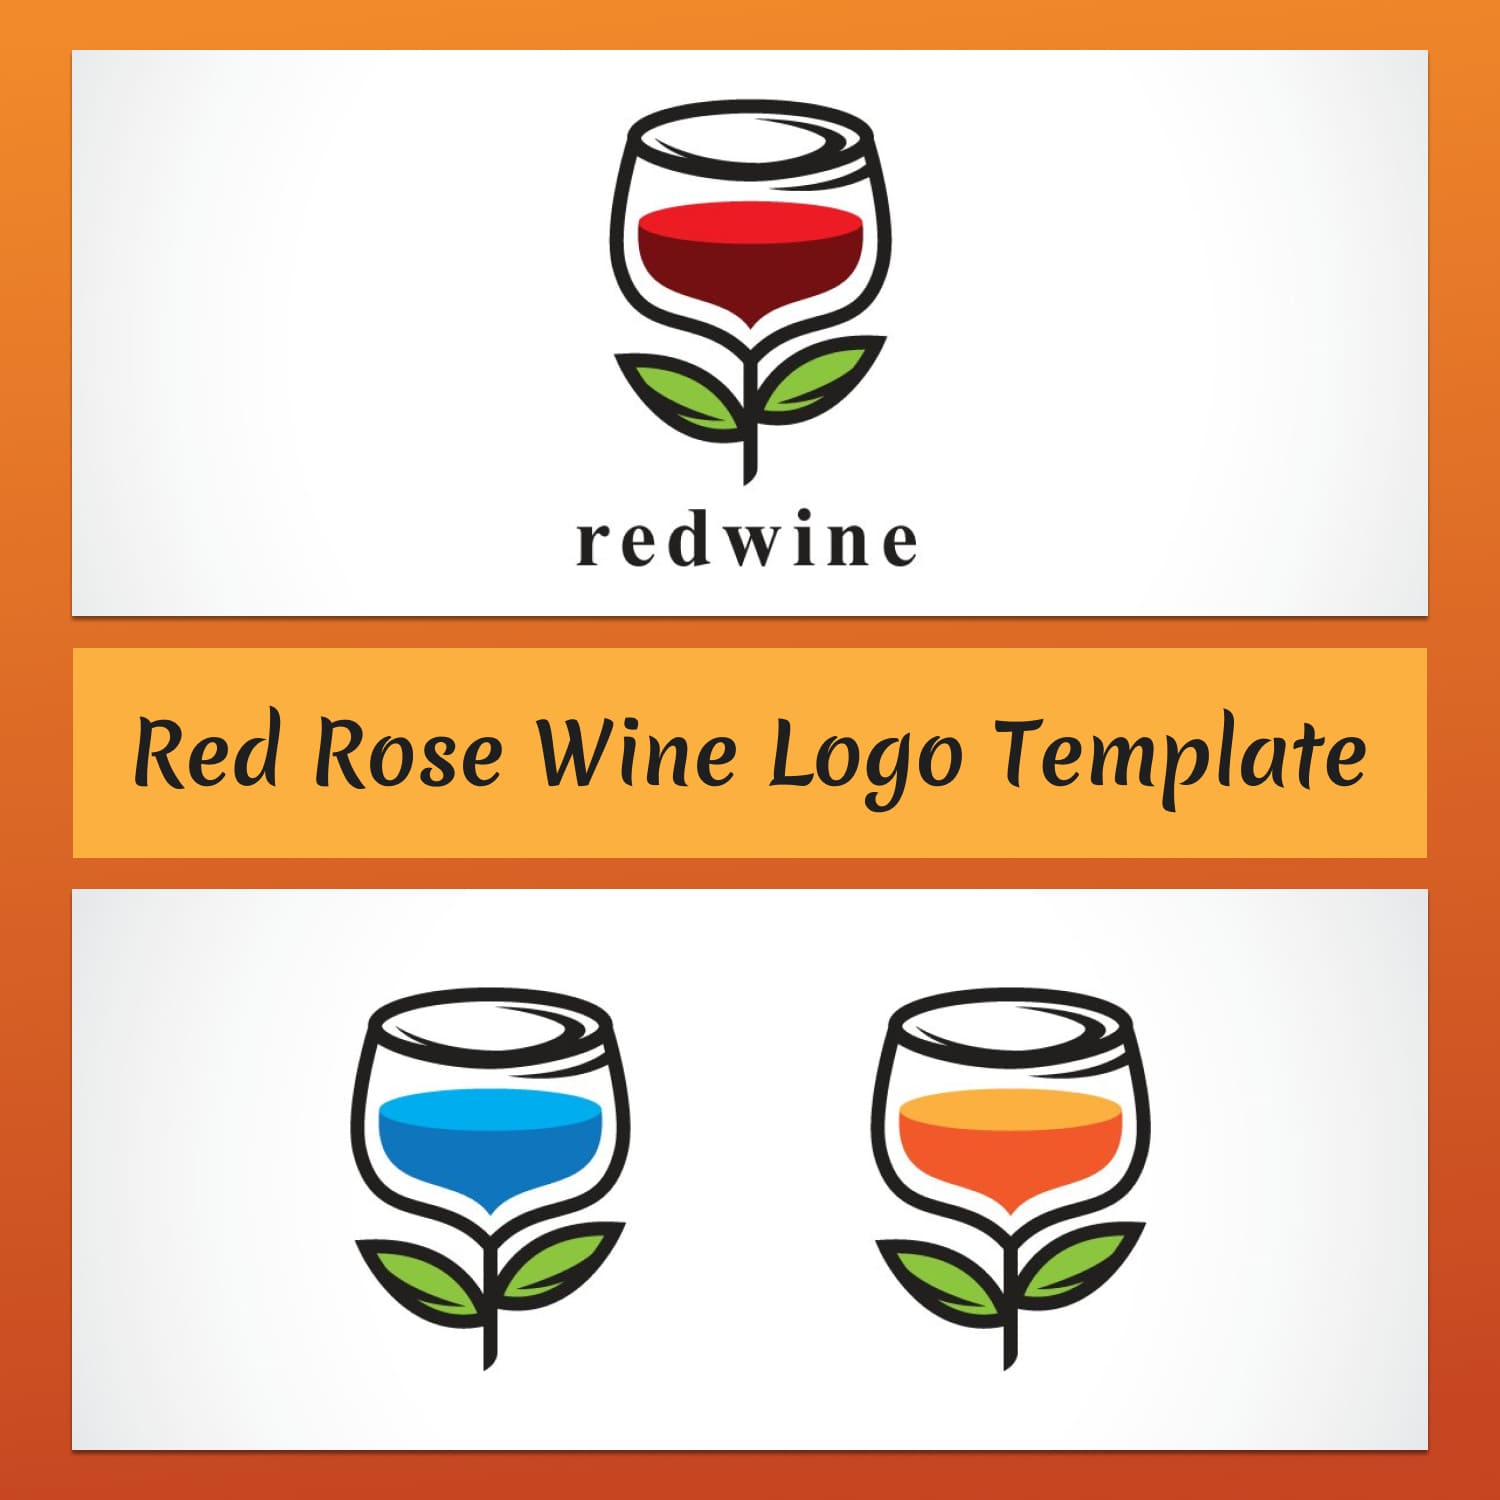 Red Rose Wine Logo Template.